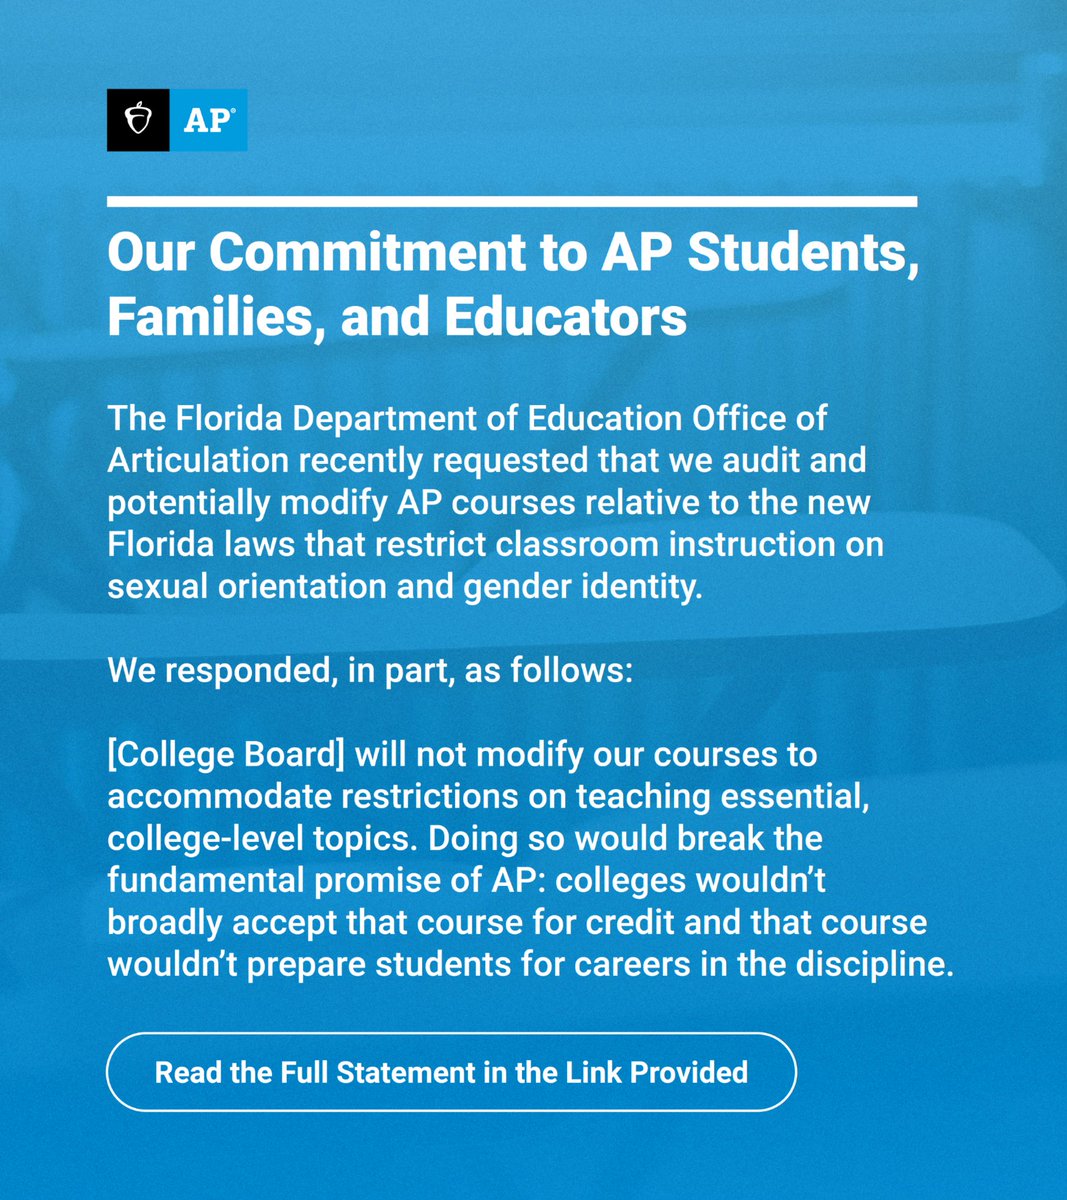 The Florida Department of Education Office of Articulation recently requested that we audit and potentially modify AP courses relative to the new Florida laws that restrict classroom instruction on sexual orientation and gender identity. Read our response: spr.ly/6011ONtQt